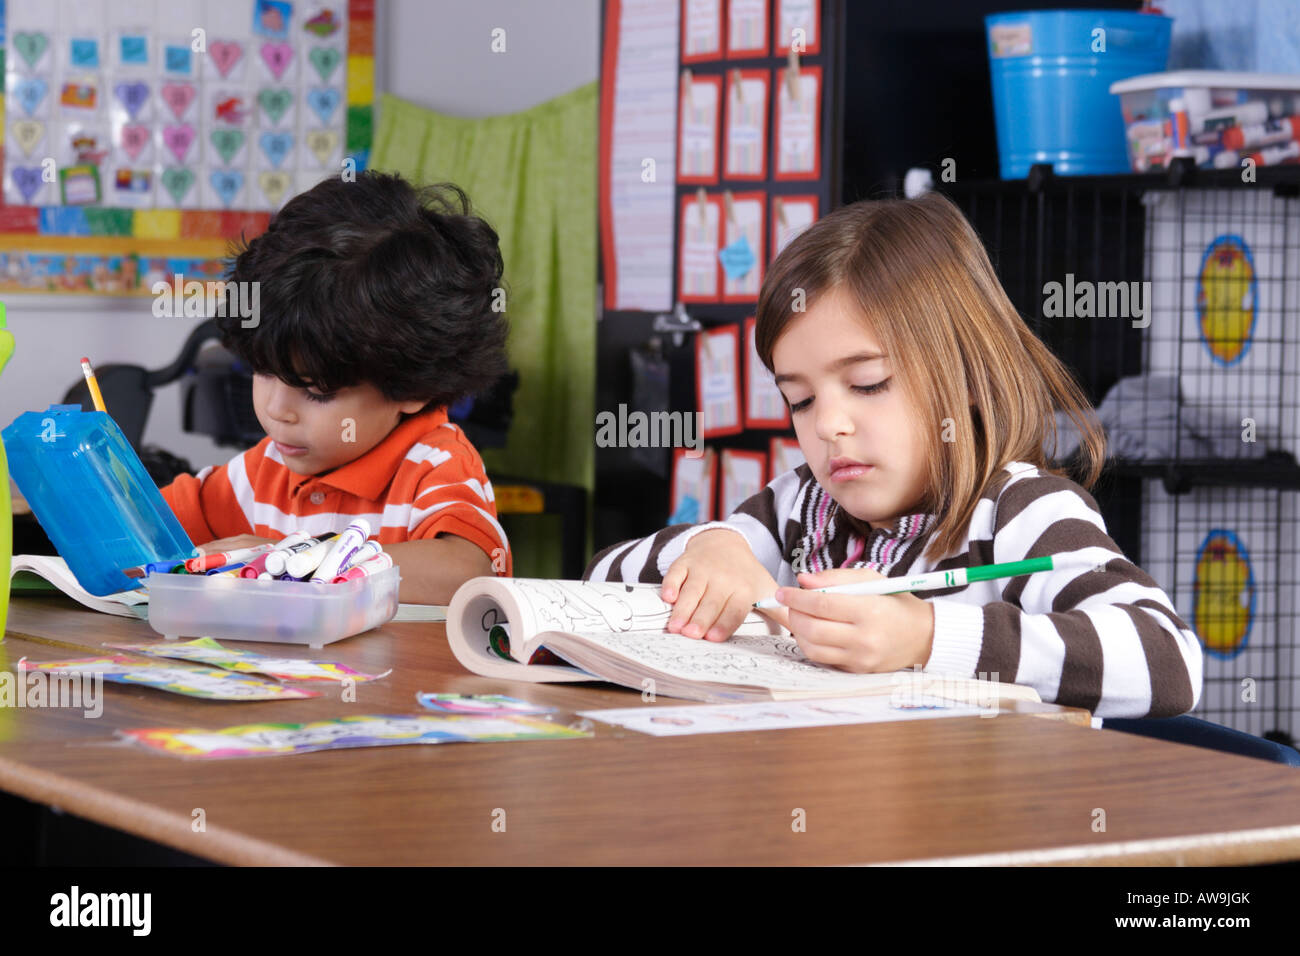 Stock Photograph of two young kids drawing and coloring in class Stock Photo